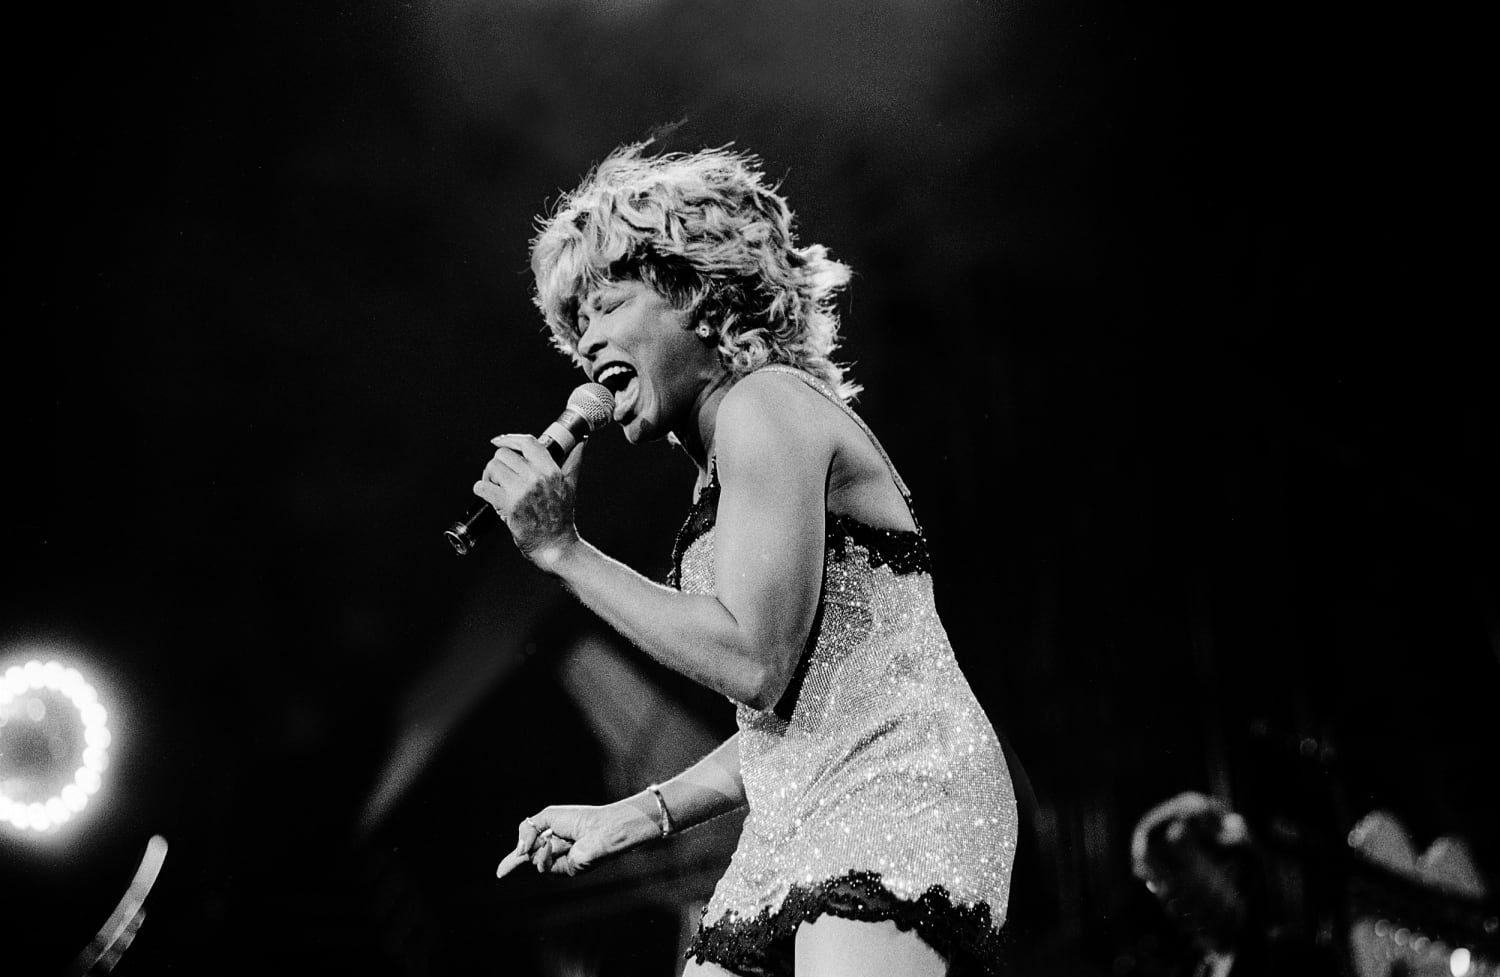 Tina Turner, trailblazing ‘Queen of Rock ‘n’ Roll’ who dazzled audiences worldwide, dies at 83 (nbcnews.com)